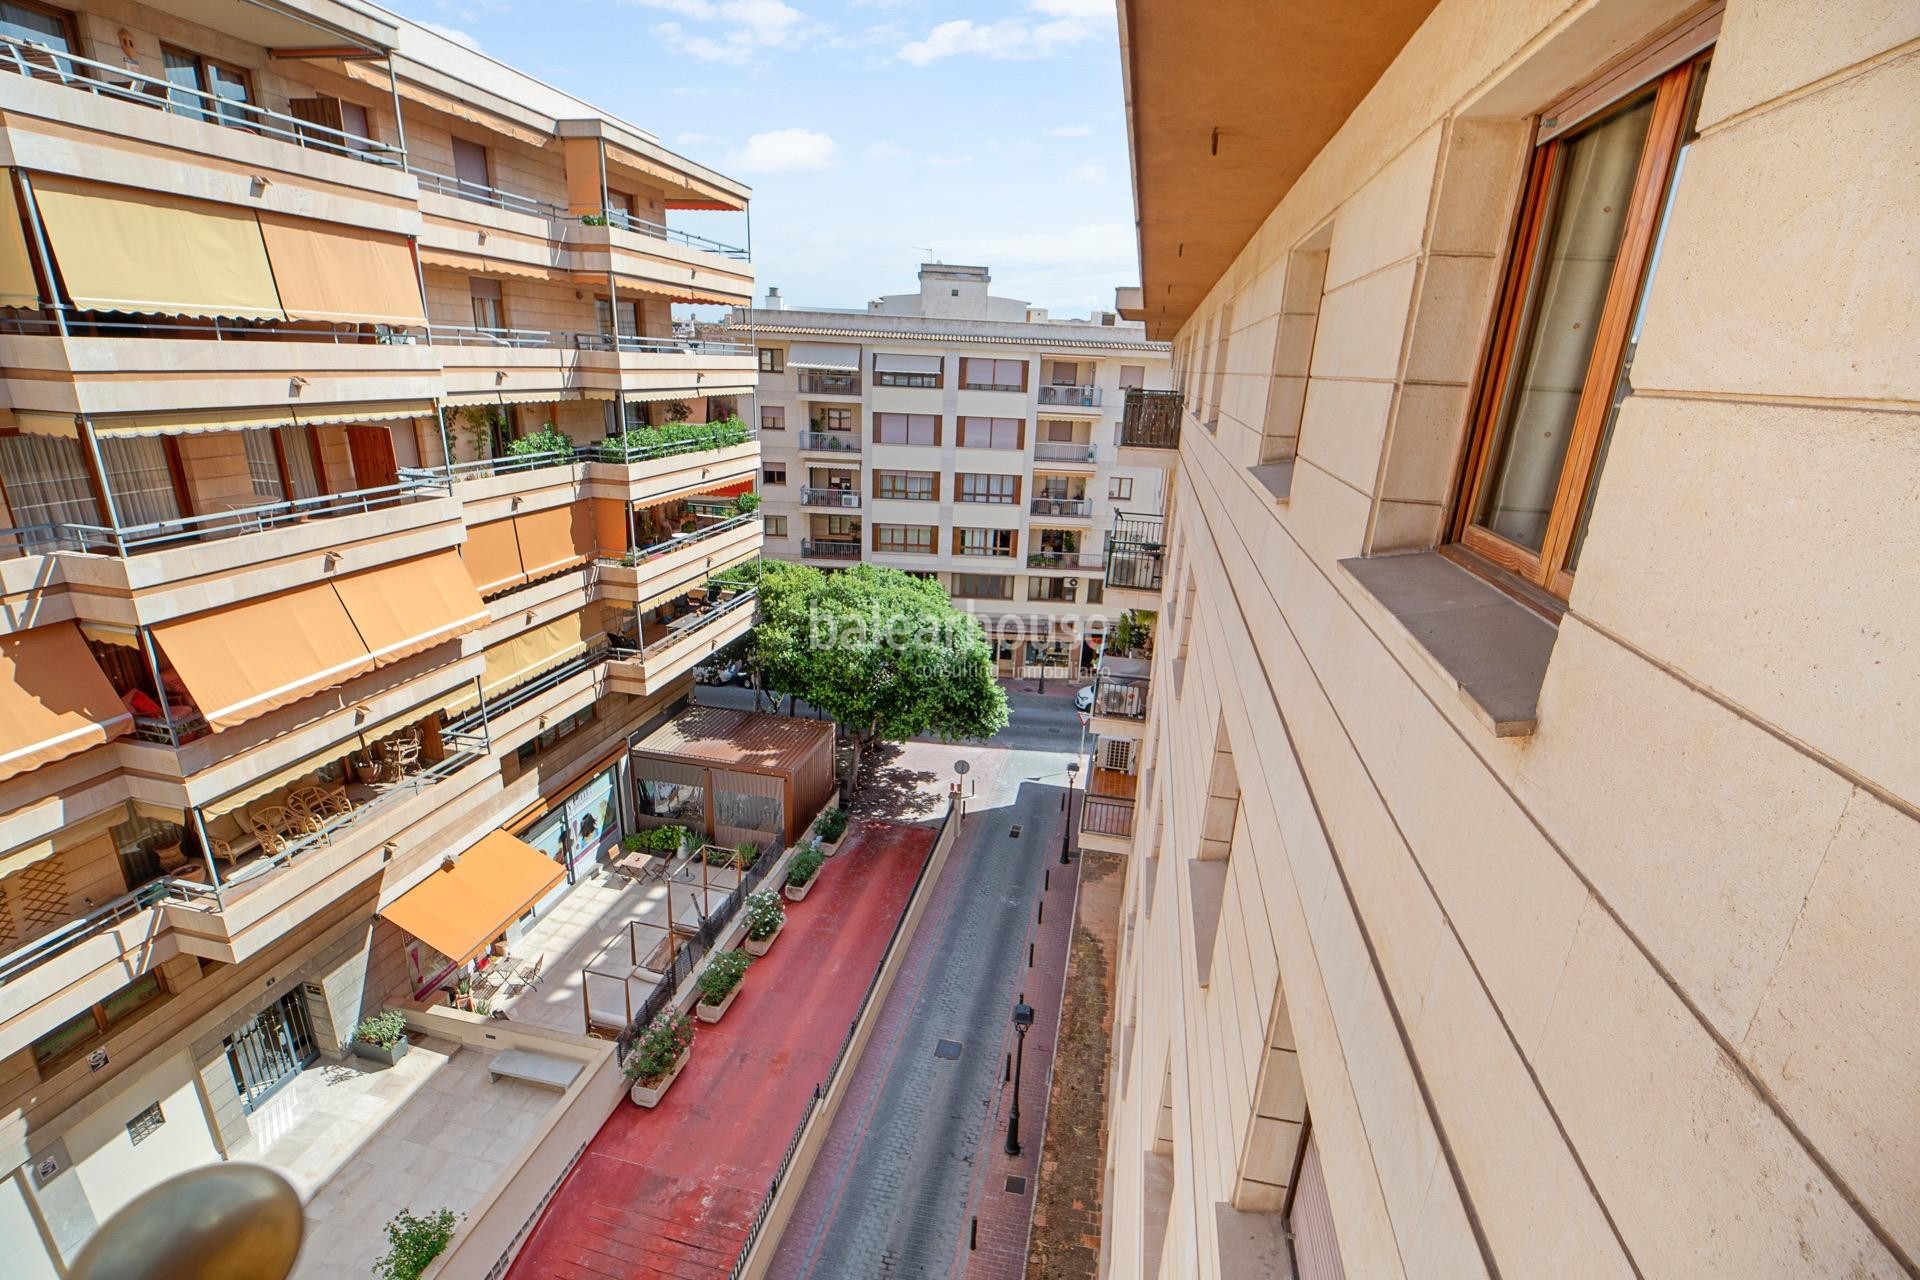 Excellent and bright flat of large dimensions located in the centre of Palma.